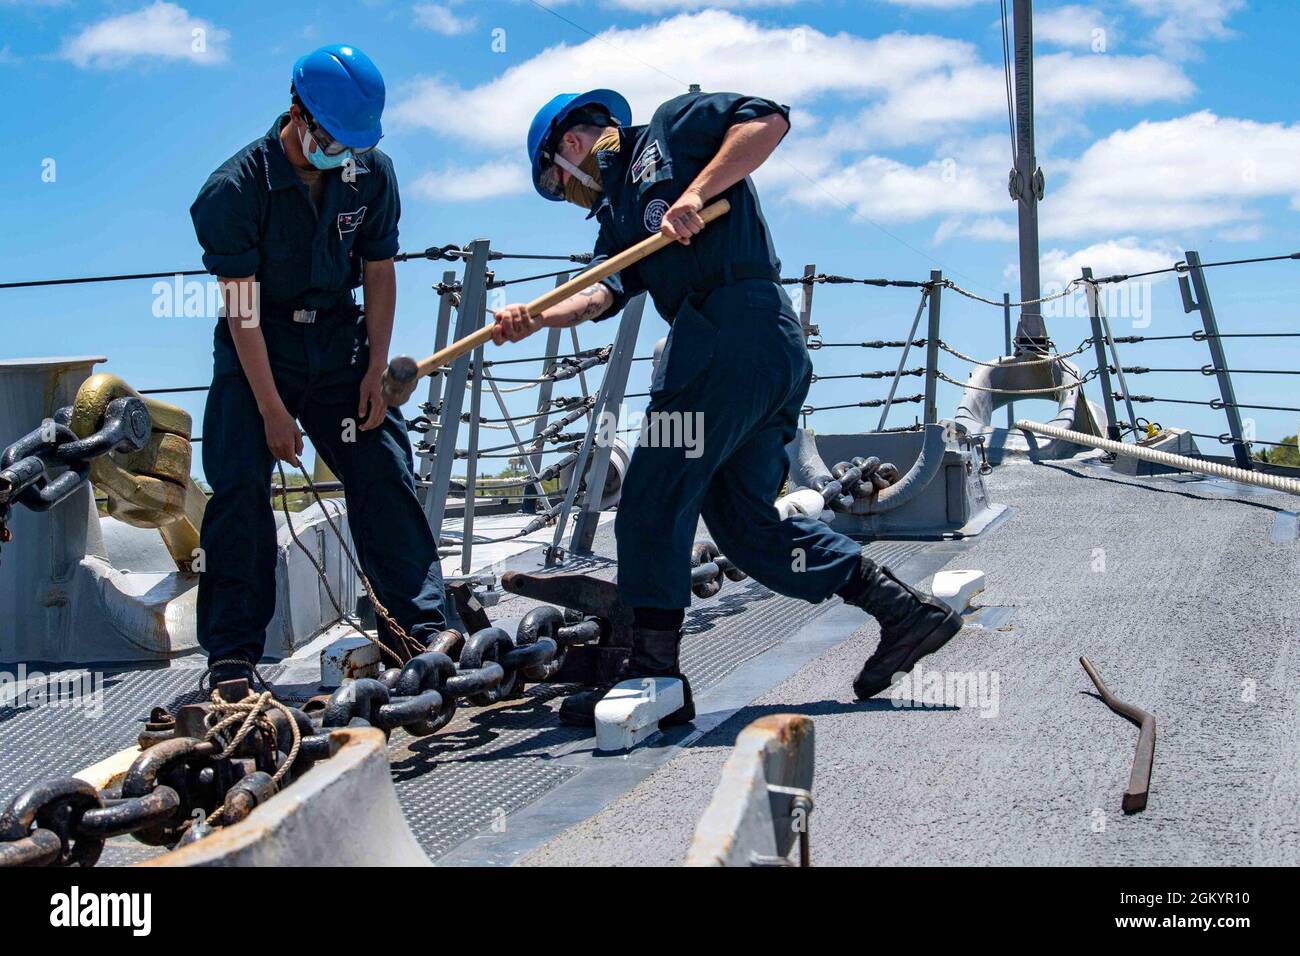 210730-N-LP924-1221 PACIFIC OCEAN (July 30, 2021) Boatswain’s Mate Seaman Dylan Brussman, right, a native of Surprise, Arizona, knocks free the anchor chain aboard Arleigh Burke-class destroyer USS Michael Murphy (DDG 112), July 30, 2021. Murphy is currently underway conducting routine operations in U.S. Third Fleet. Stock Photo